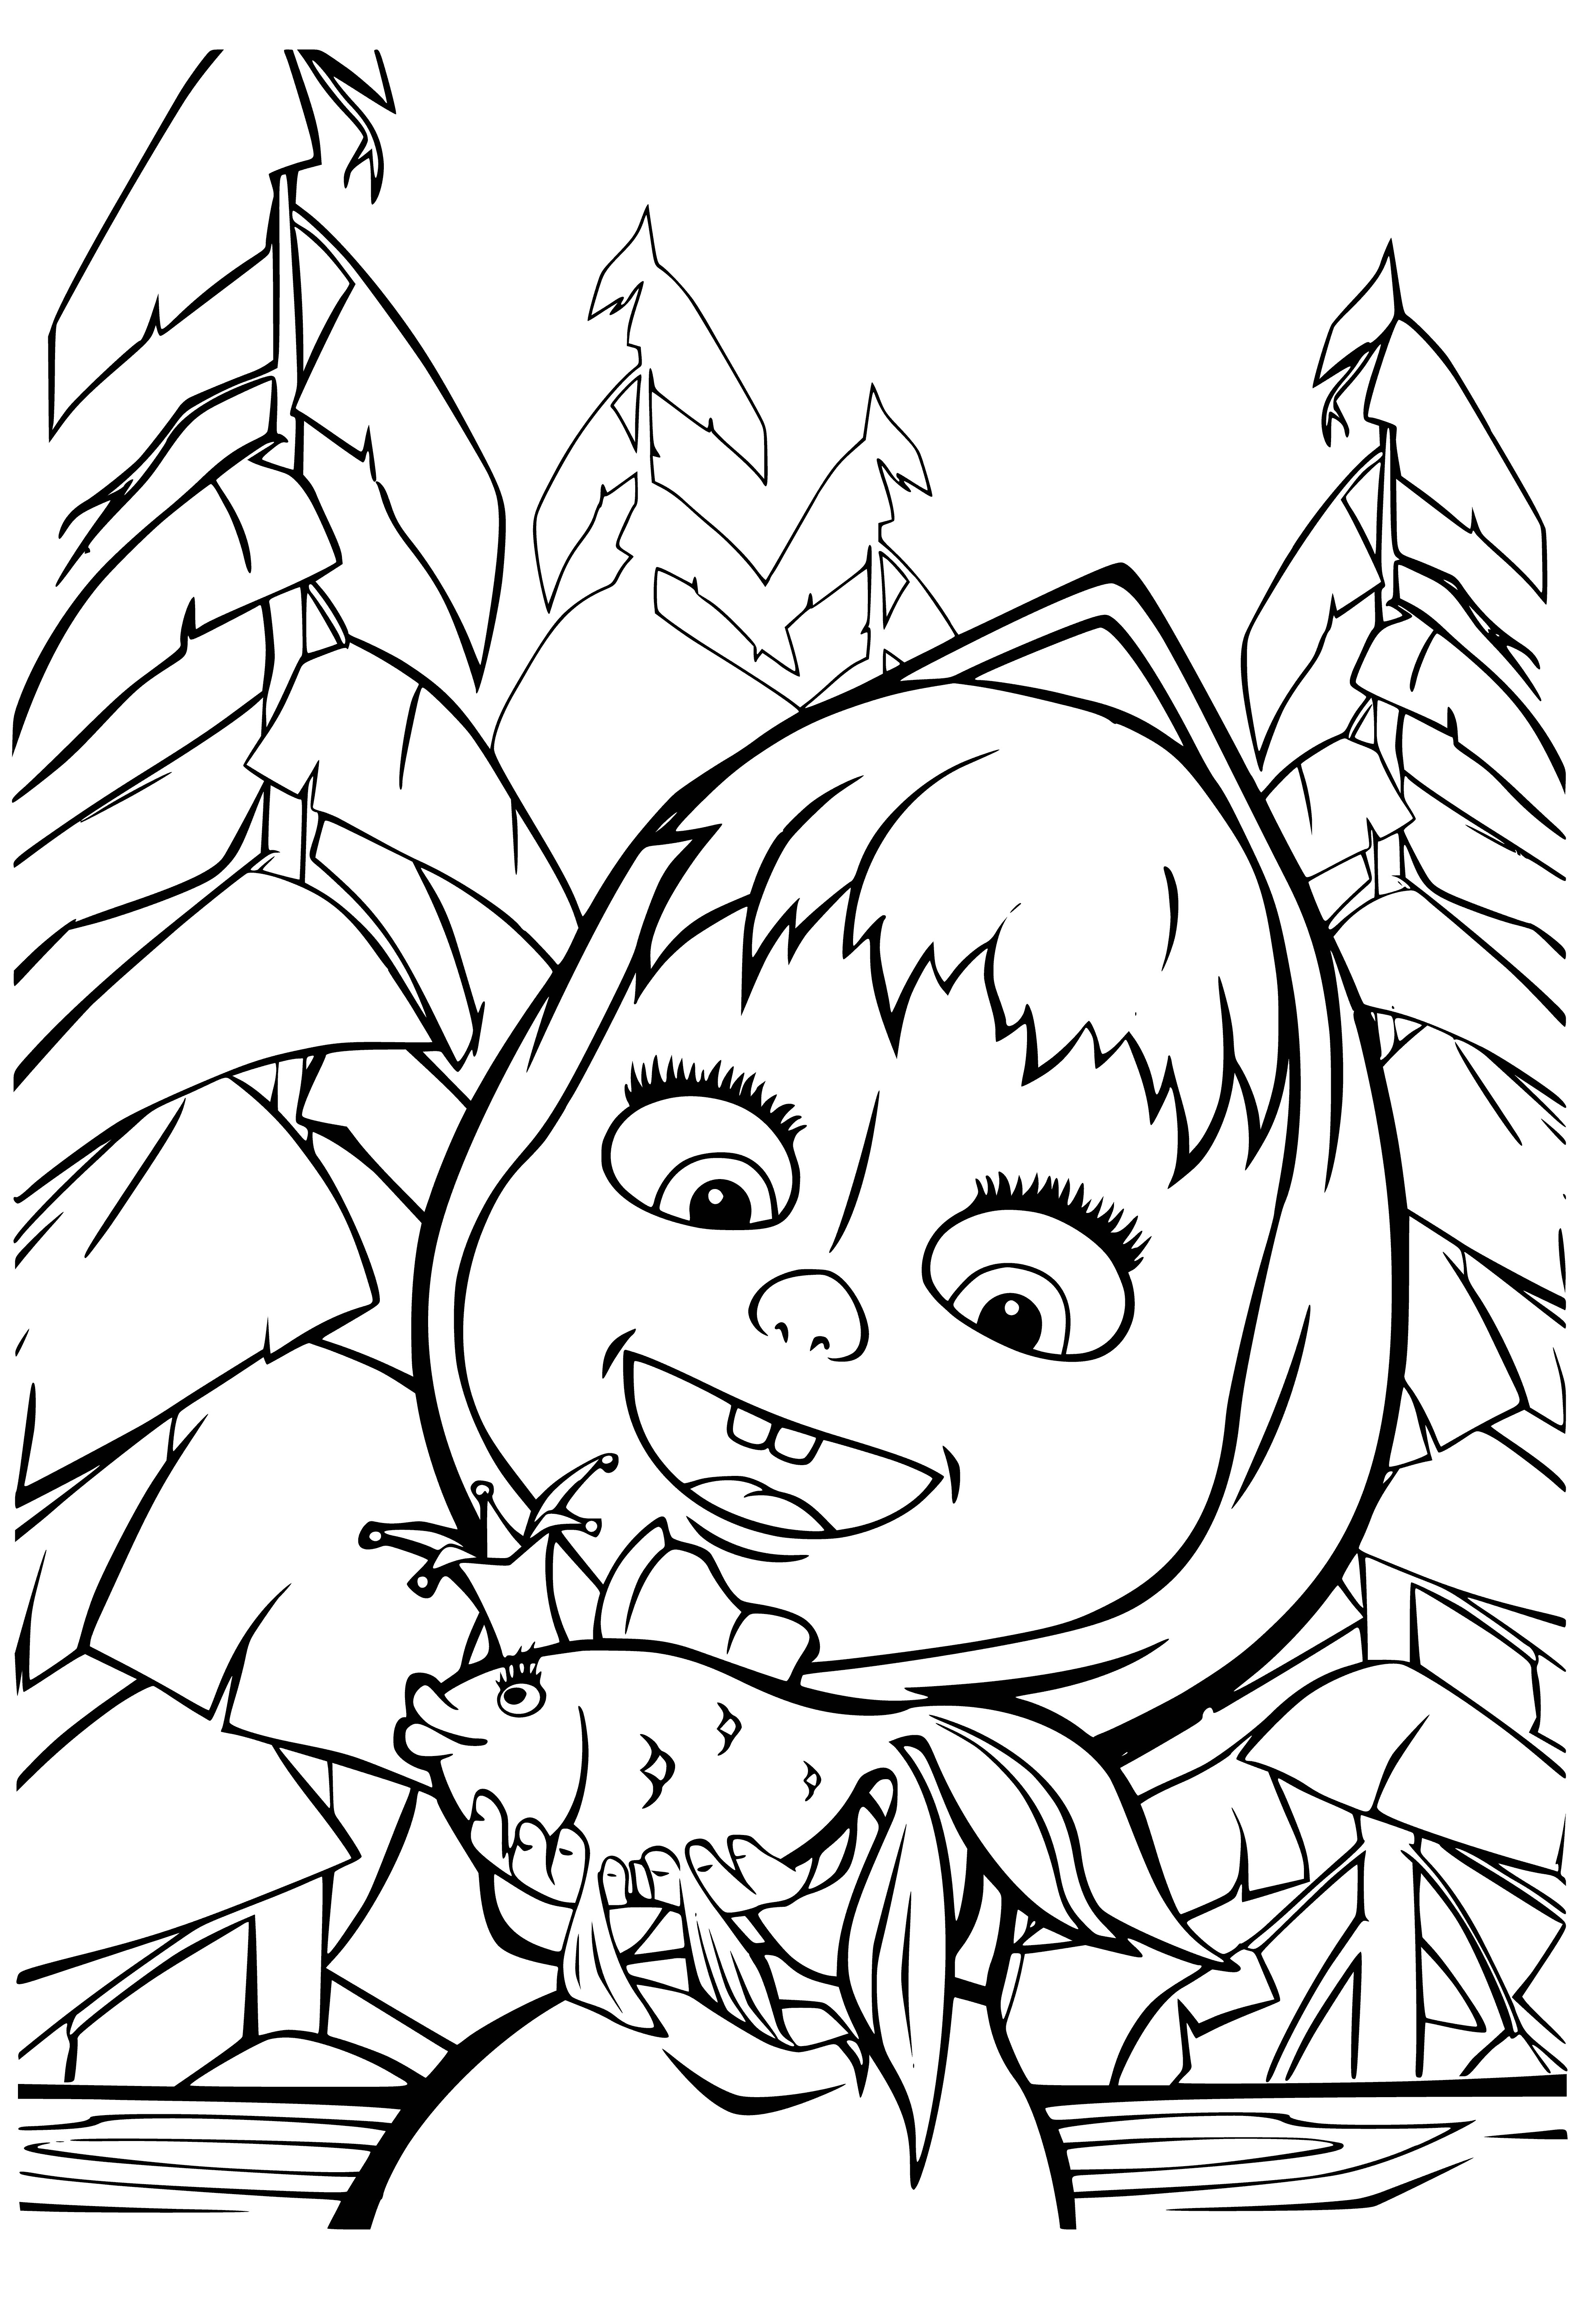 coloring page: Masha catches a goldfish in a net and looks excitedly at it, delighting in her catch.